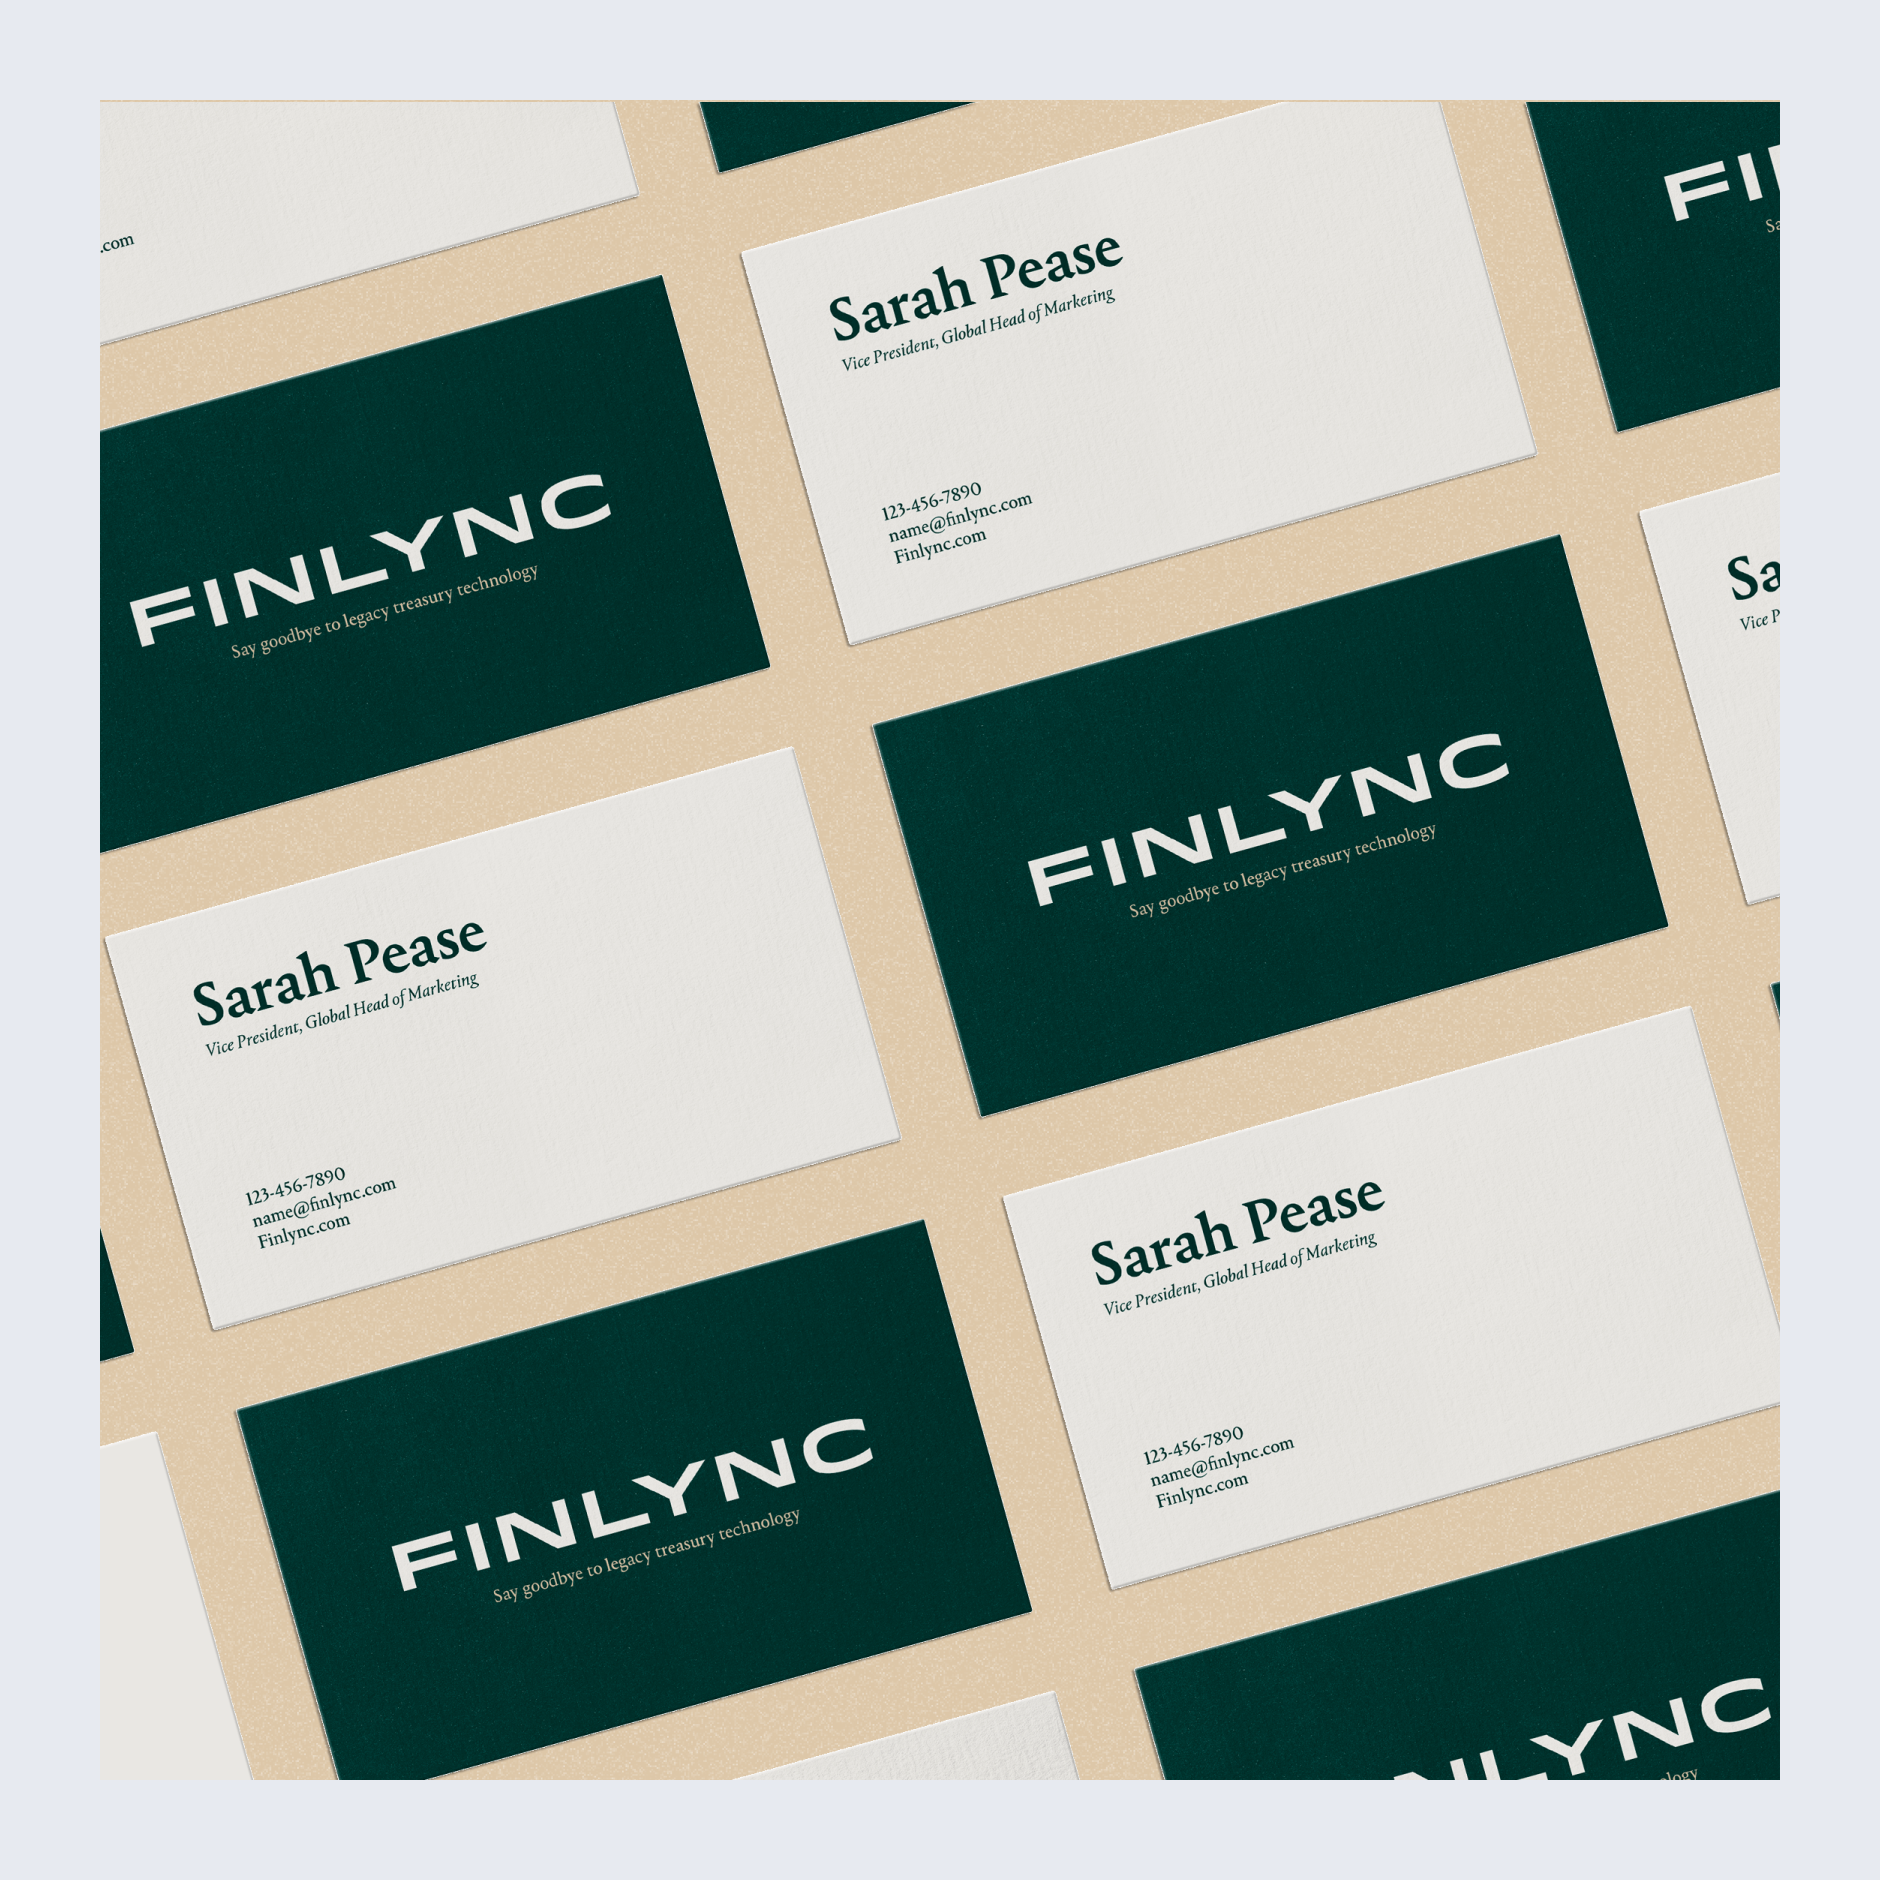 Series of Finlync business cards laid out in a grid